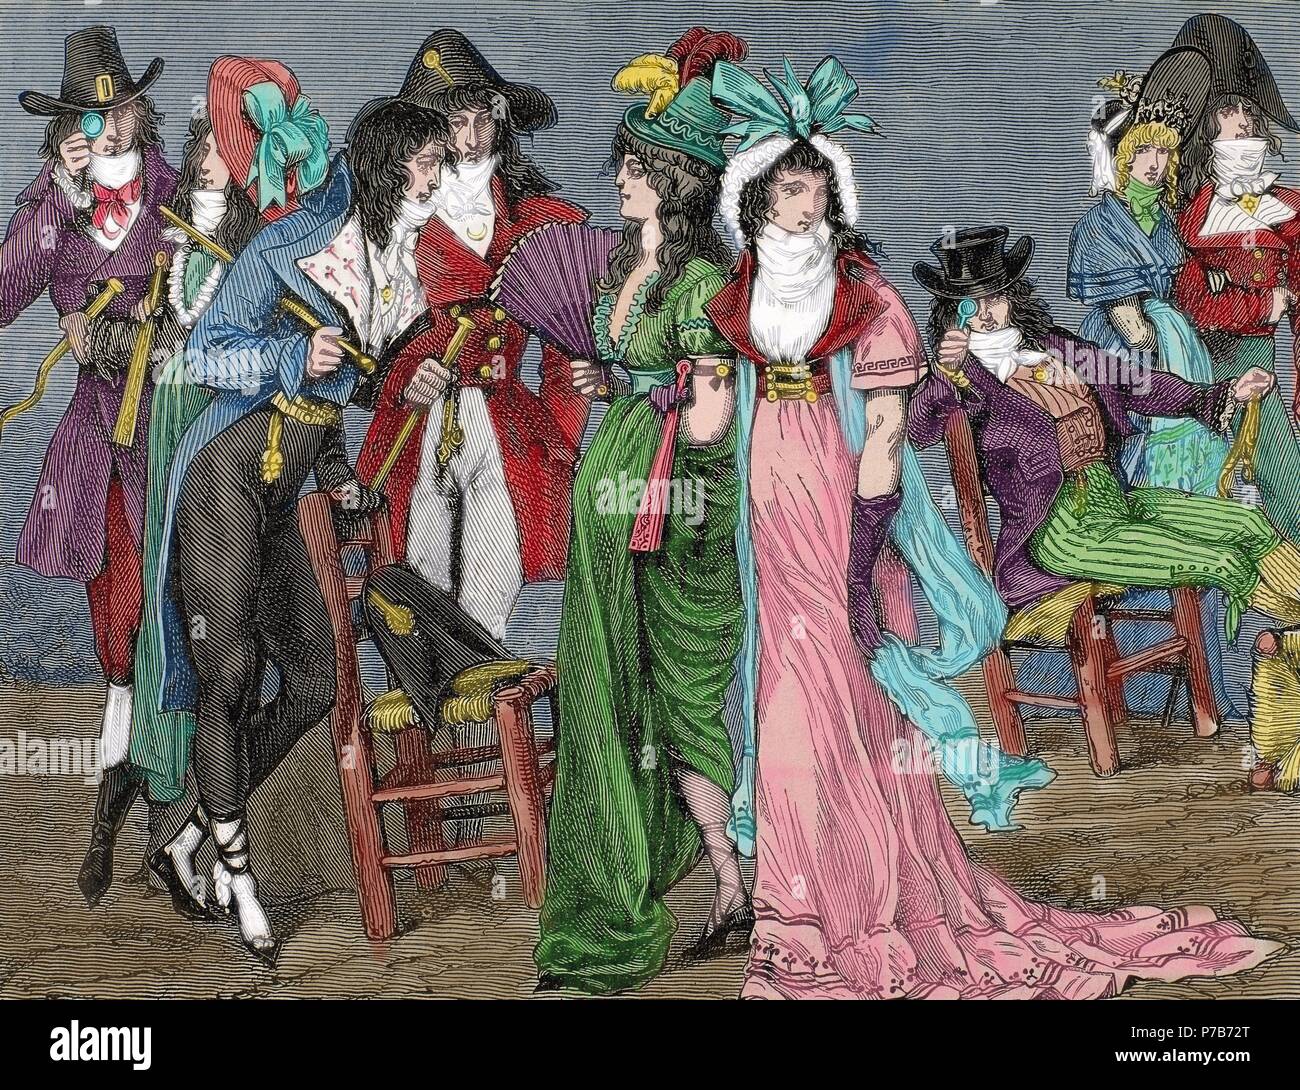 French history. First Empire (1804-1820). Dressed as bourgeois fashion empire style. Engraving. 19th century. Colored. Stock Photo